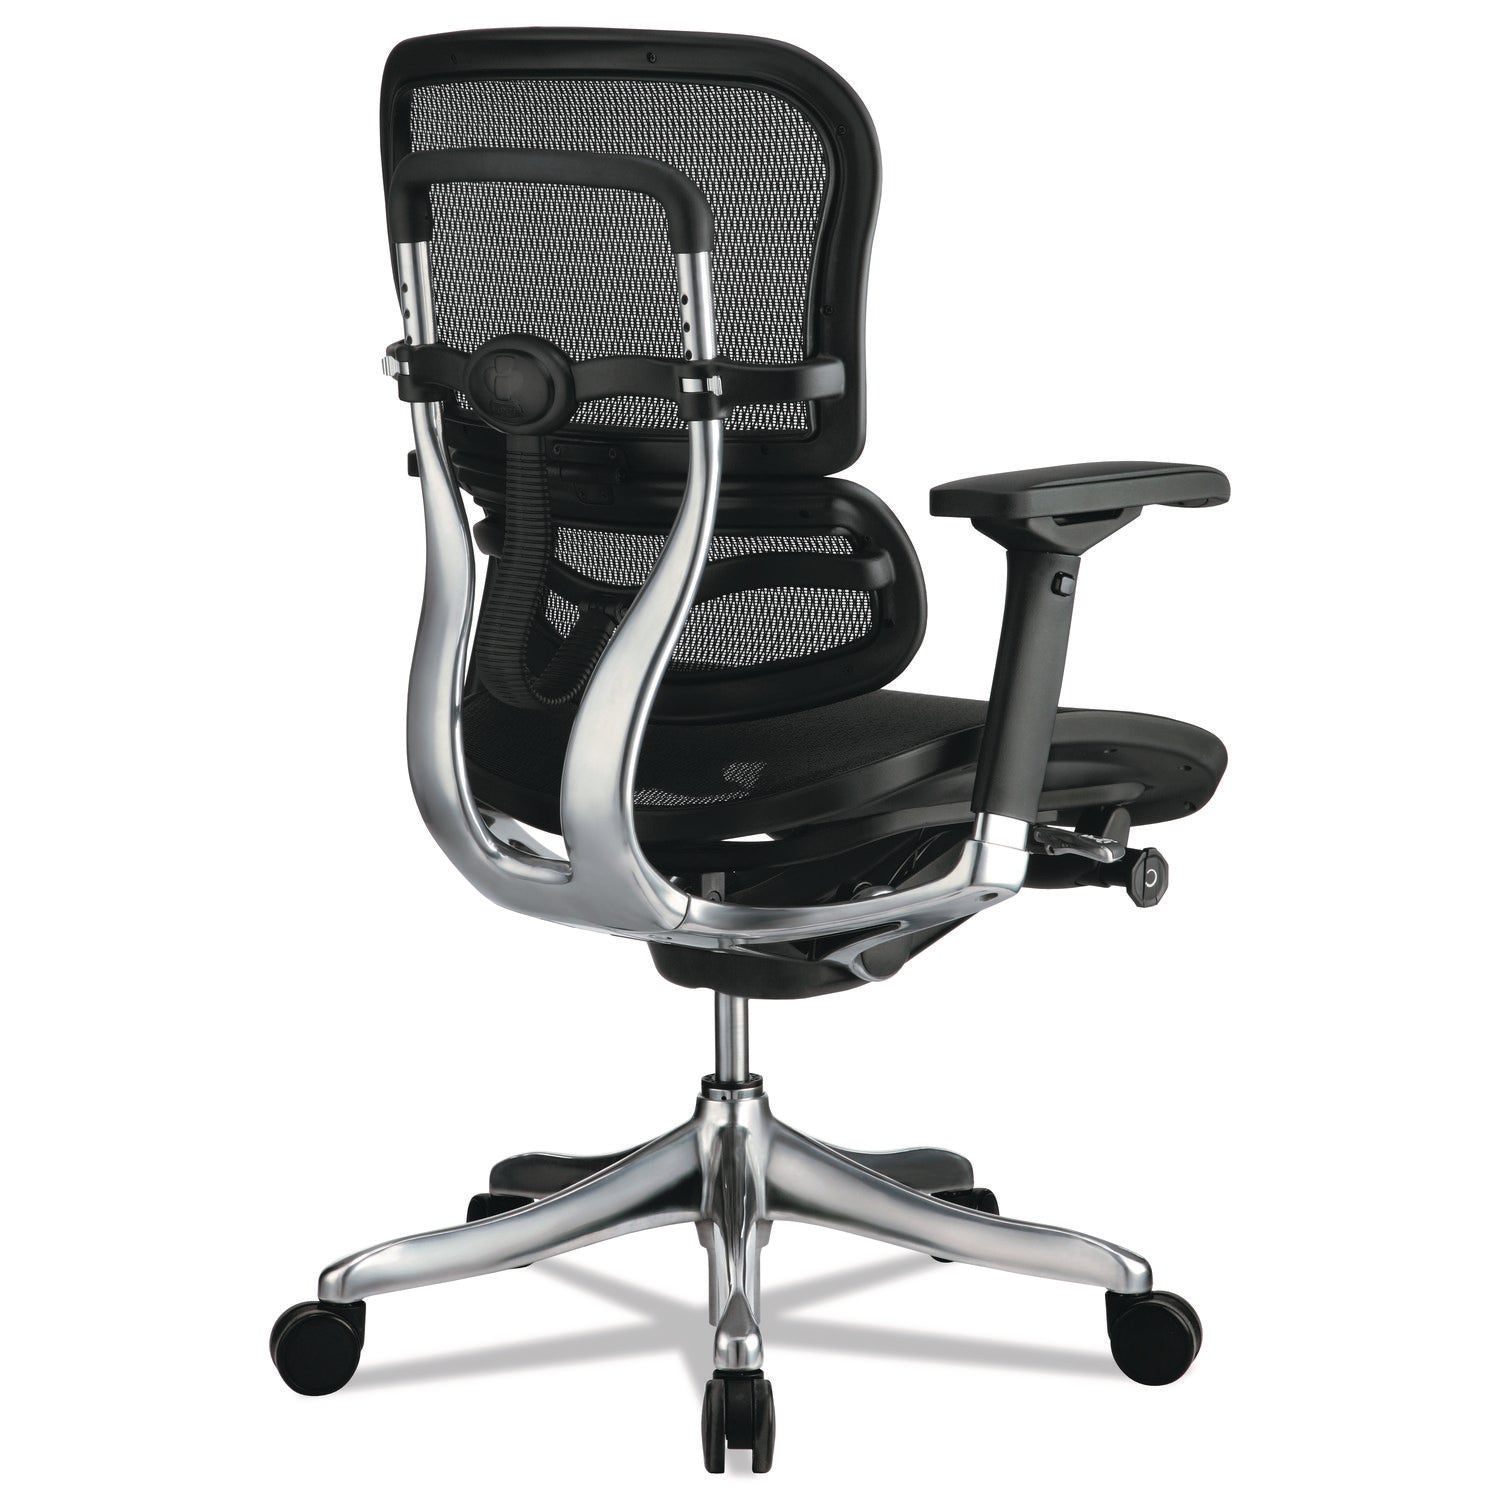 ergohuman-elite-mid-back-mesh-chair-supports-up-to-250-lb-1811-to-2165-seat-height-black_eutme5ergltn15 - 4